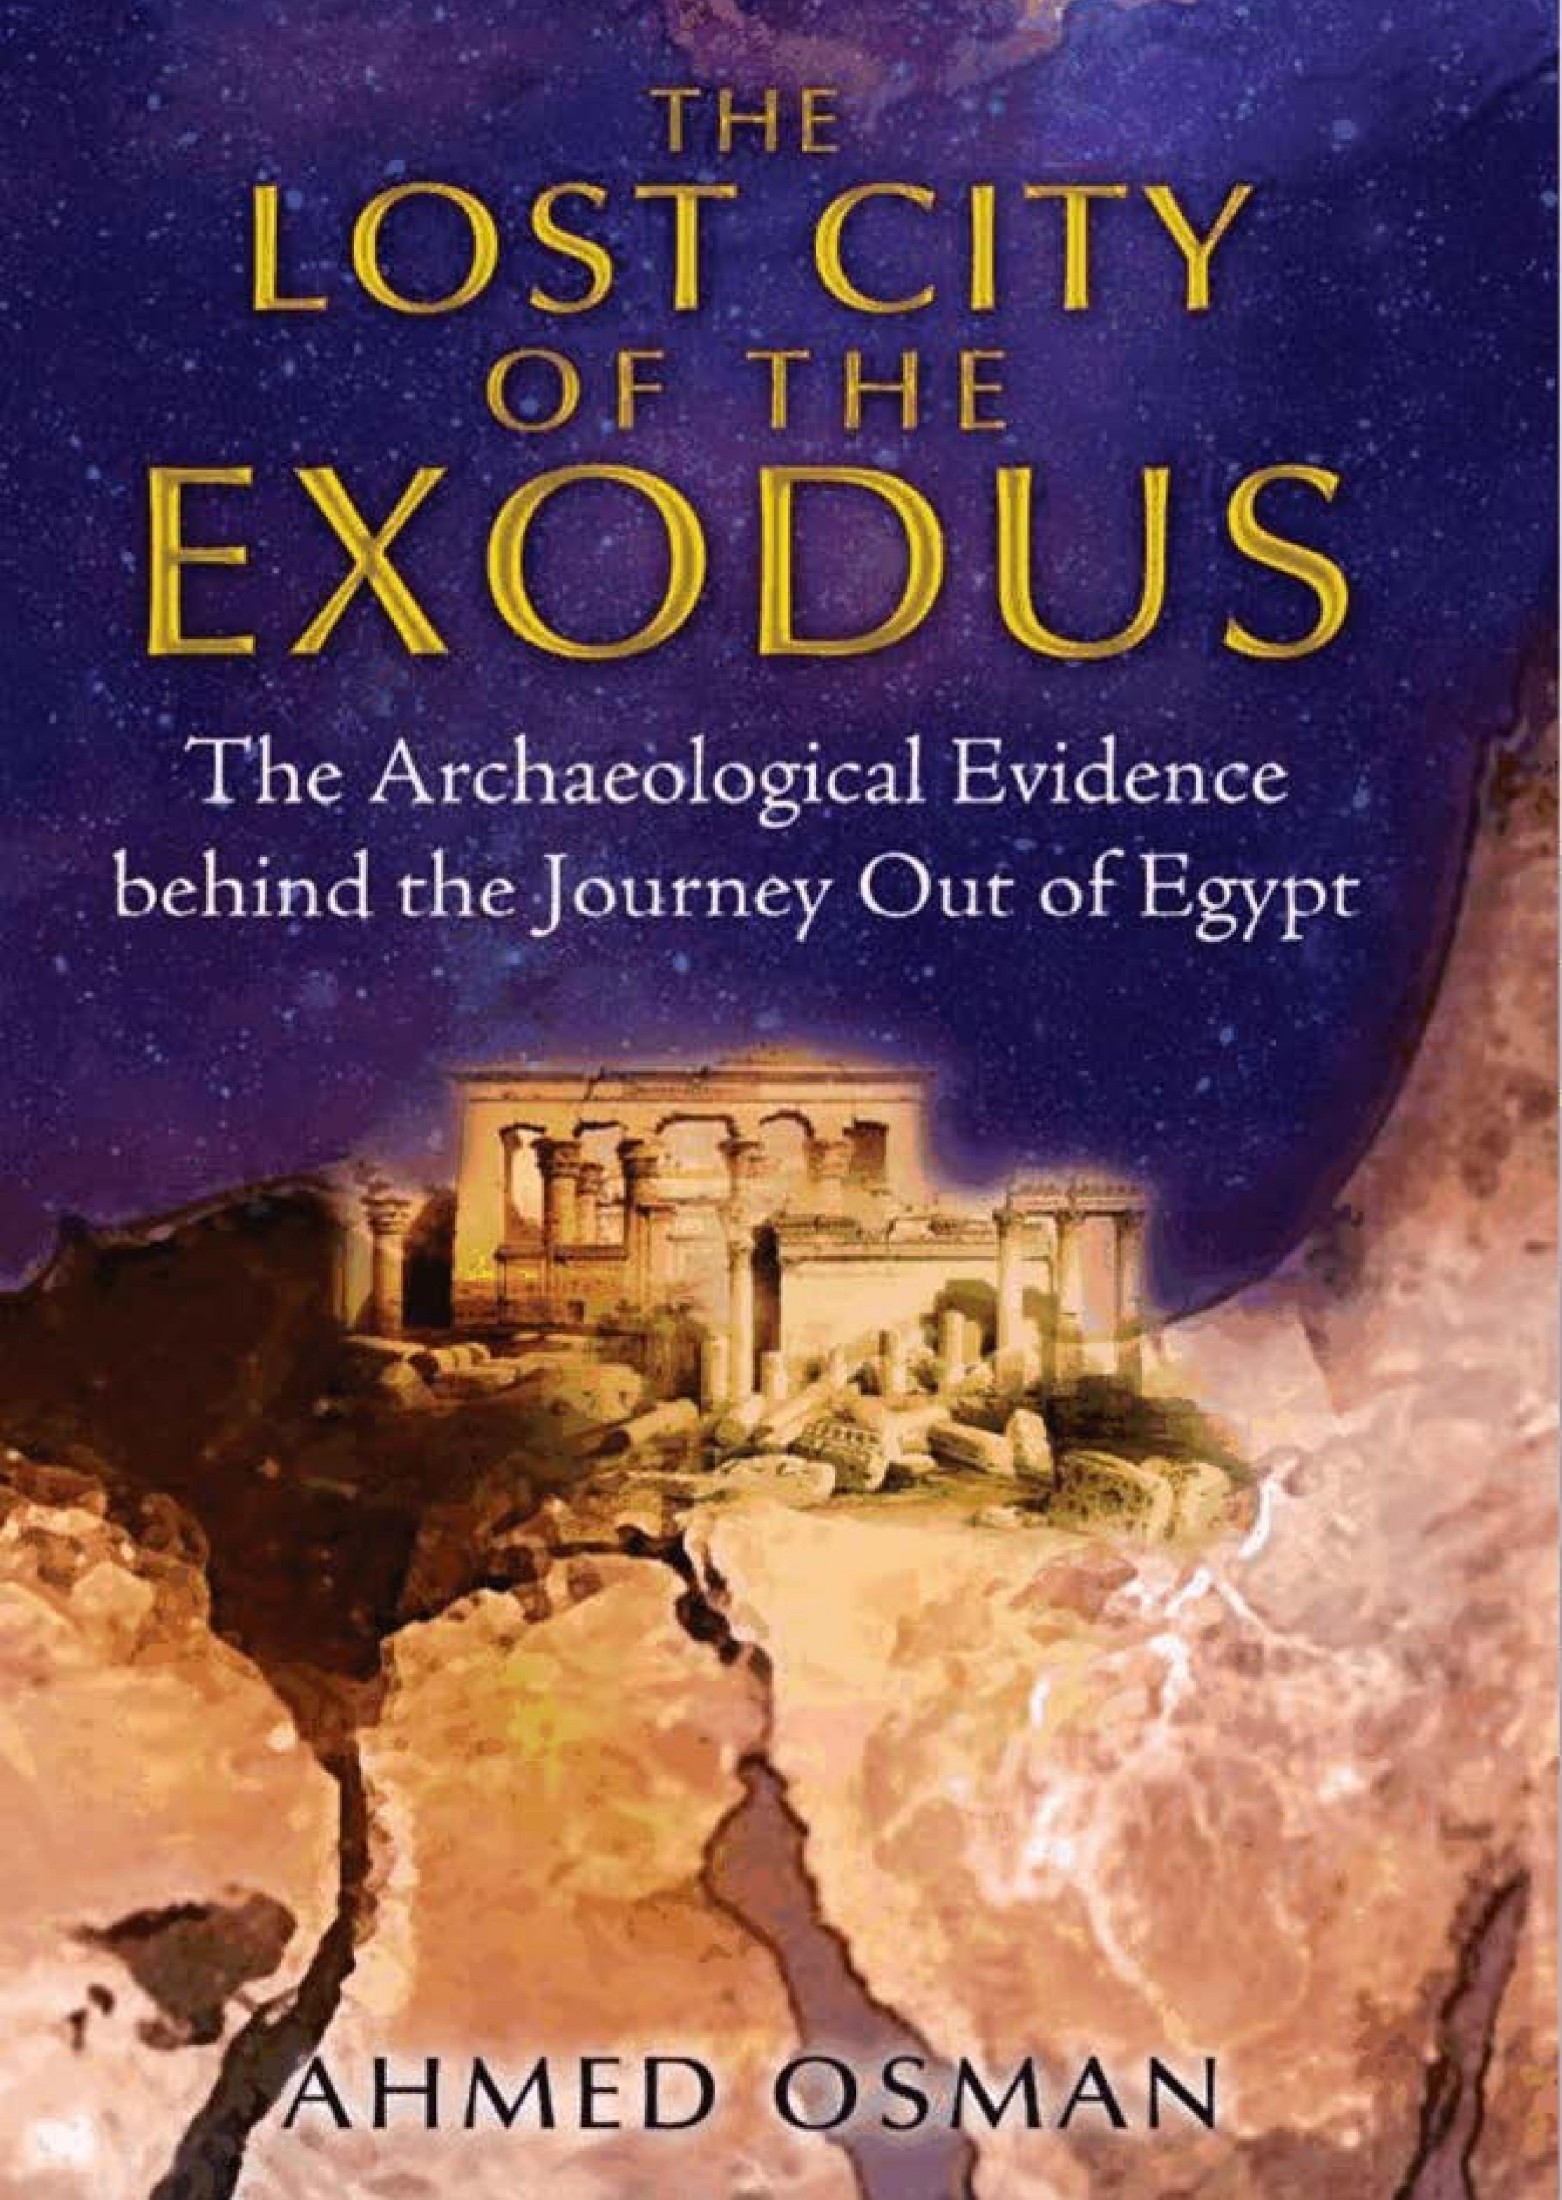 The Lost City of the Exodus: The Archaeological Evidence Behind the Journey Out of Egypt